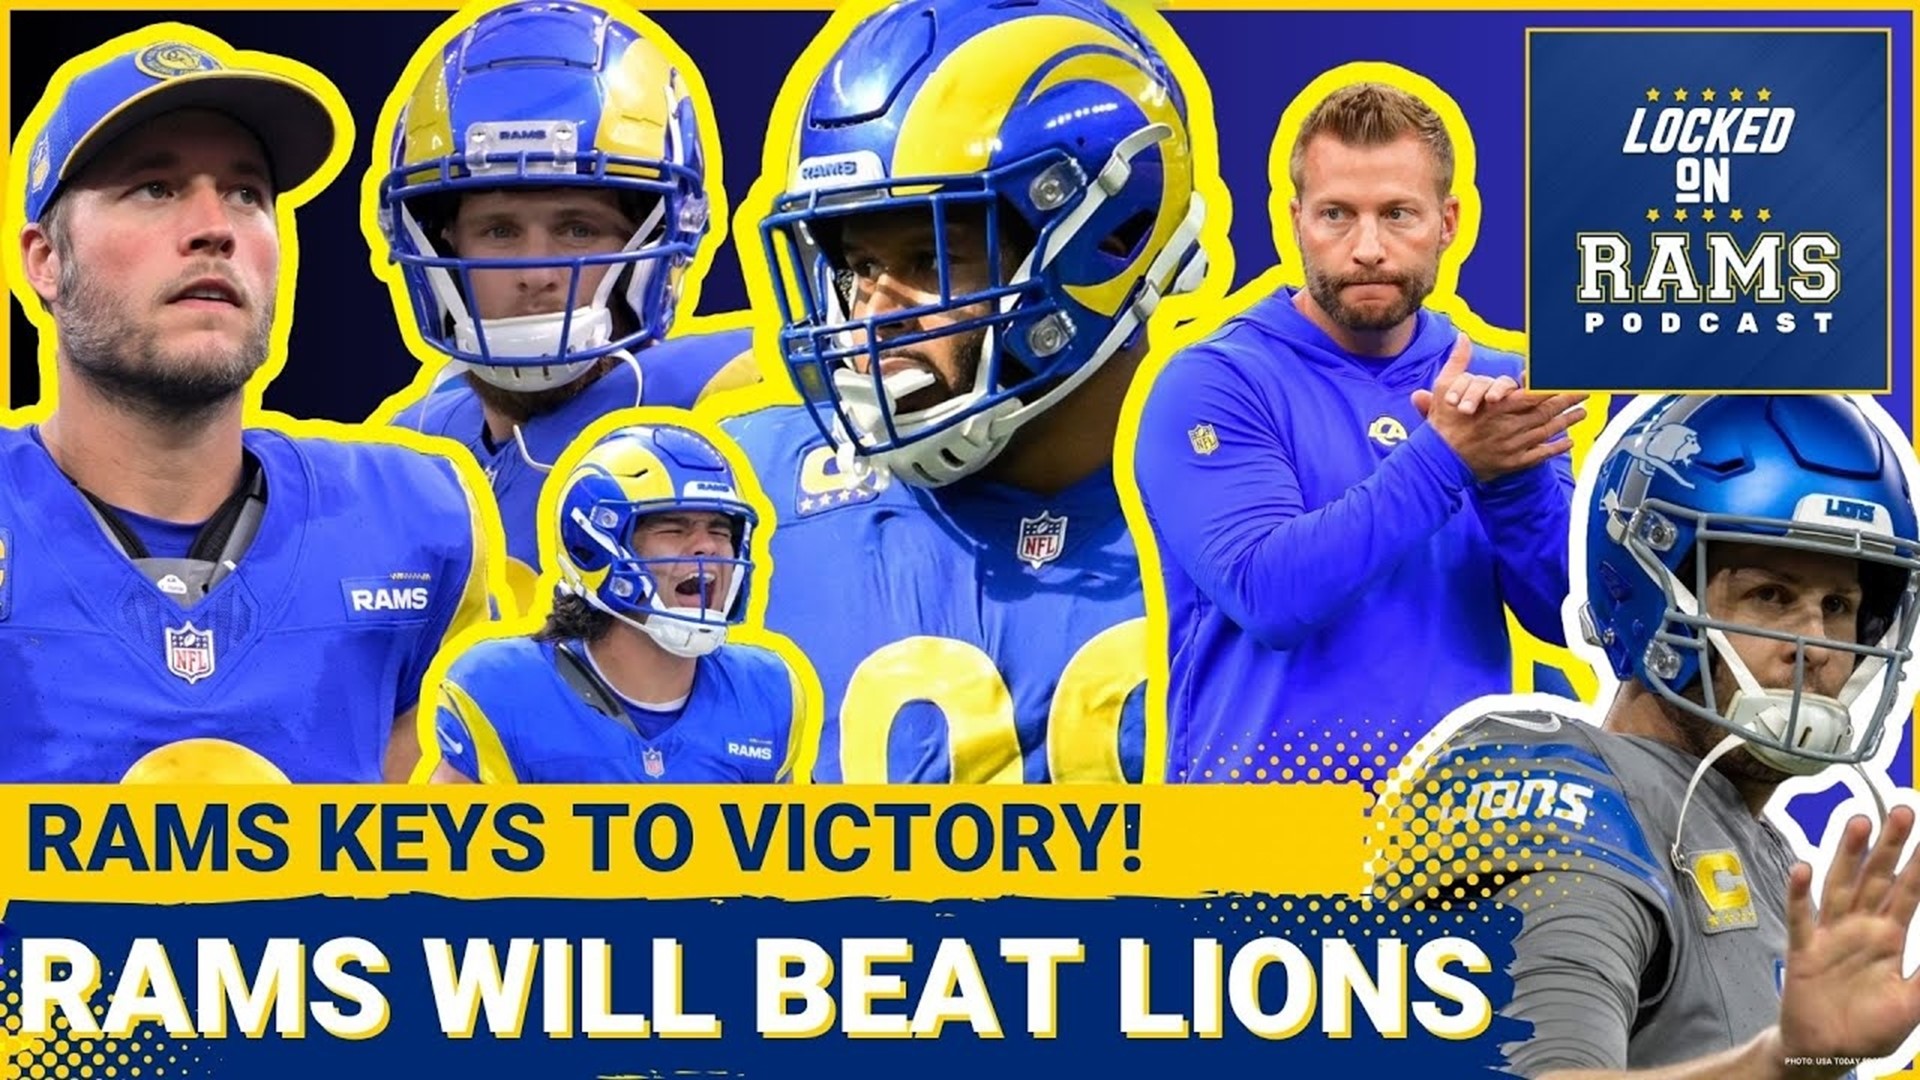 The Los Angeles Rams and Detroit Lions face off in the most anticipated matchup of the NFL's Super Wildcard Weekend.